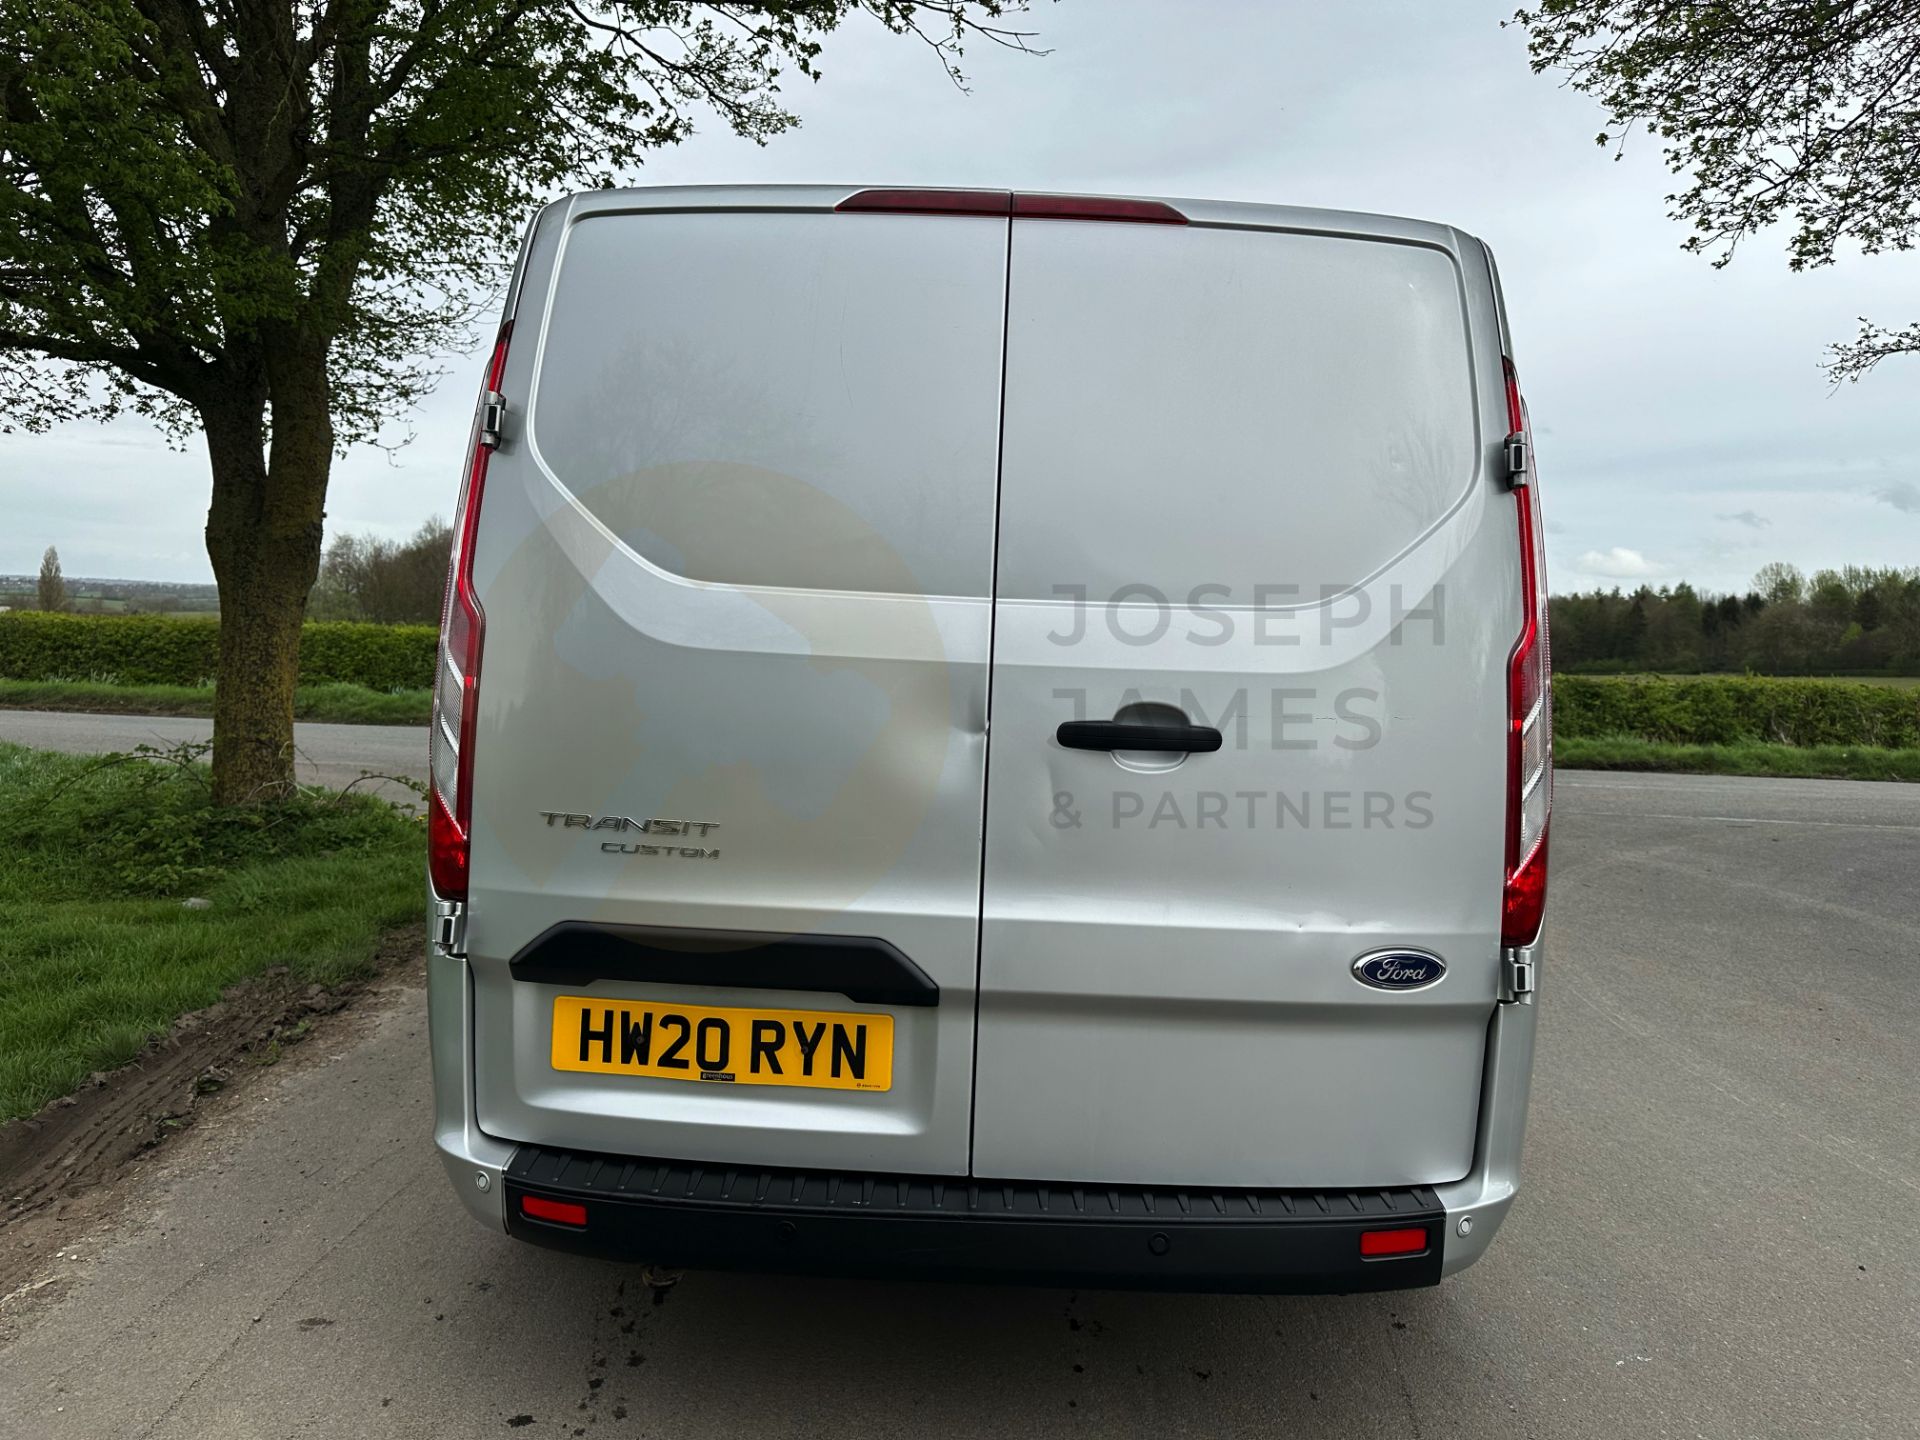 FORD TRANSIT CUSTOM "TREND" 2.0TDCI (130) 20 REG -1 OWNER- SILVER -GREAT SPEC -LOW MILEAGE - Image 11 of 38